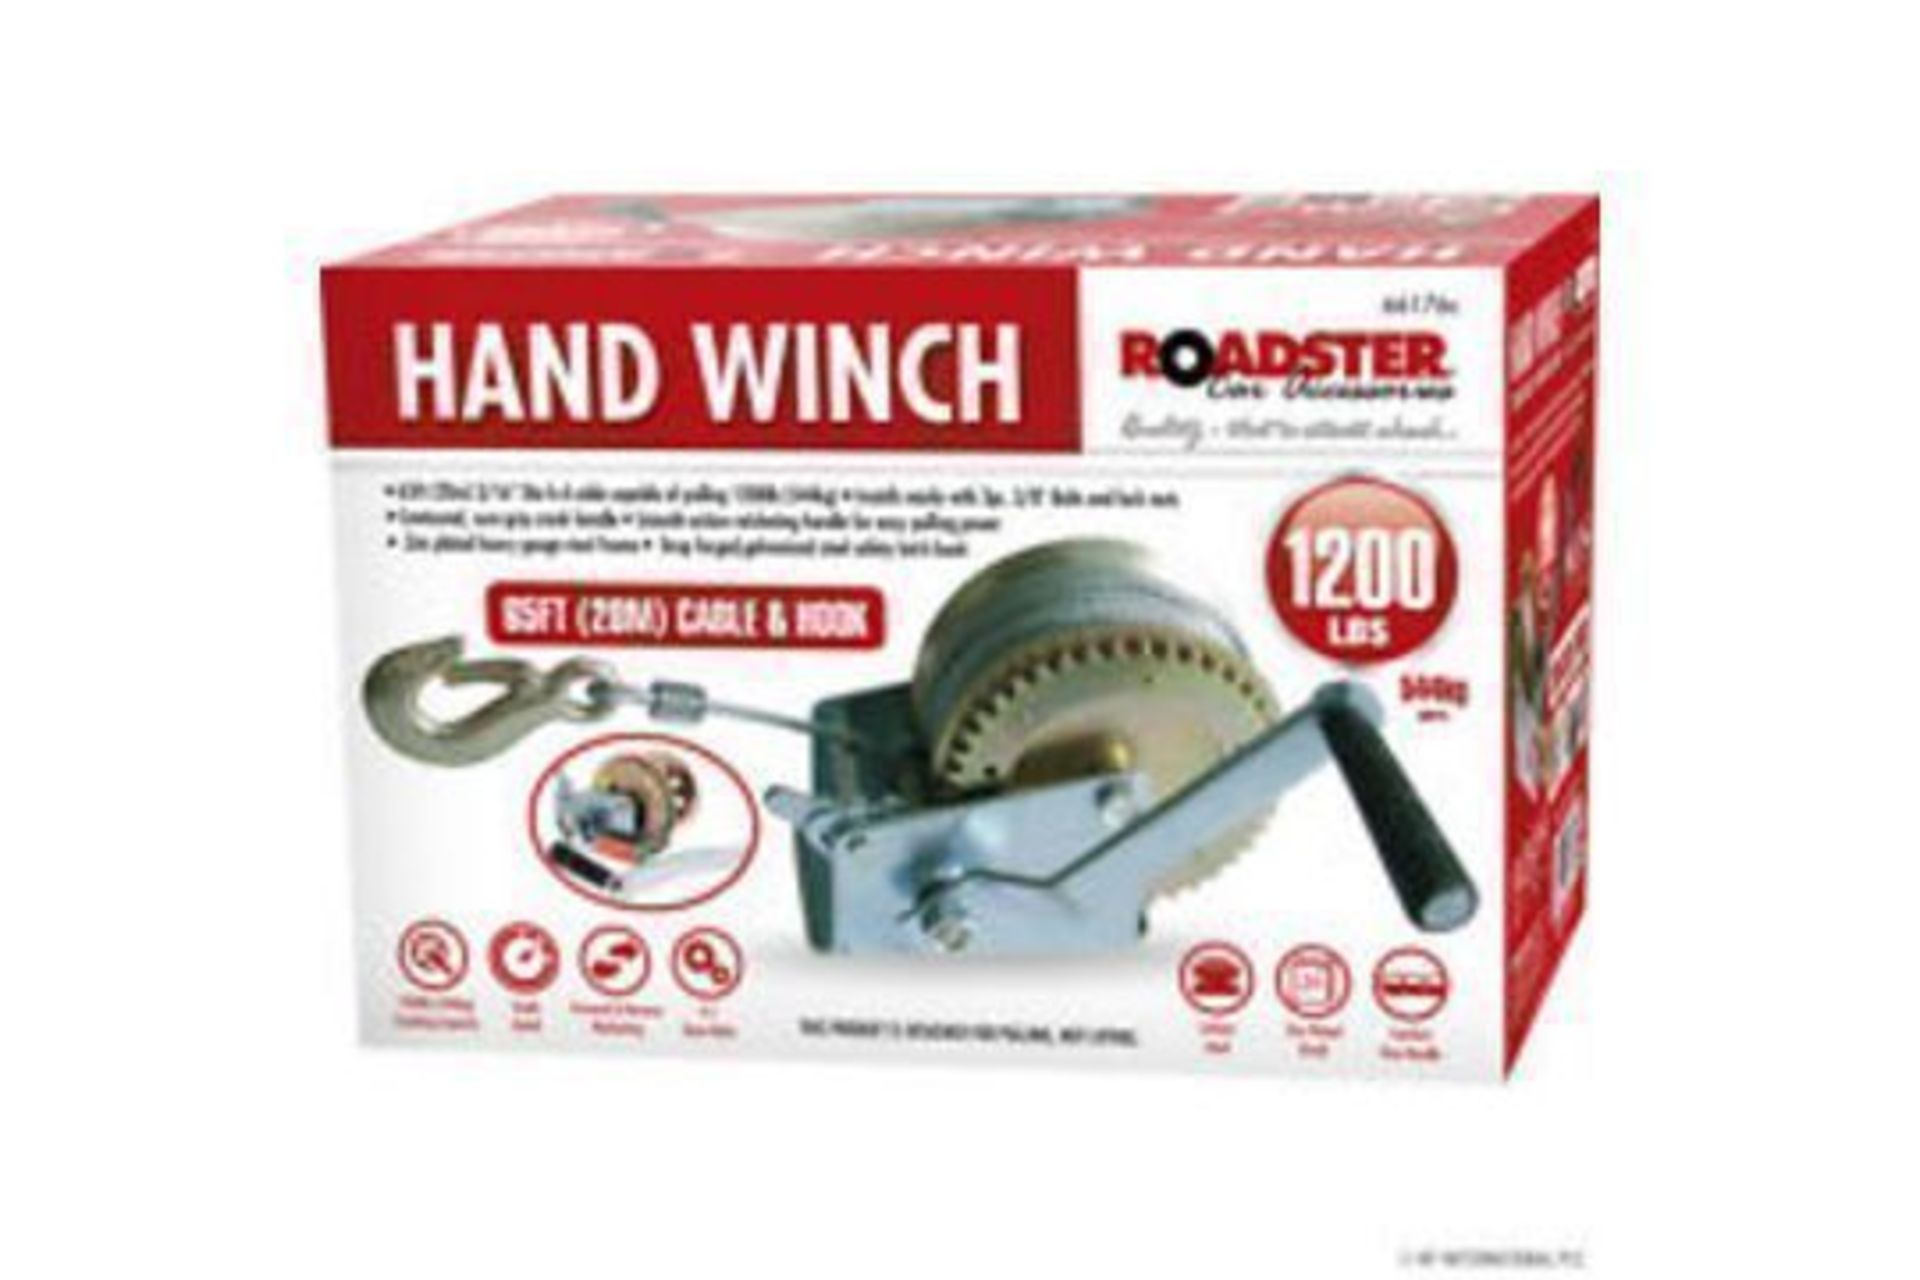 New 1200lb / 540kg Roadster Hand Winch